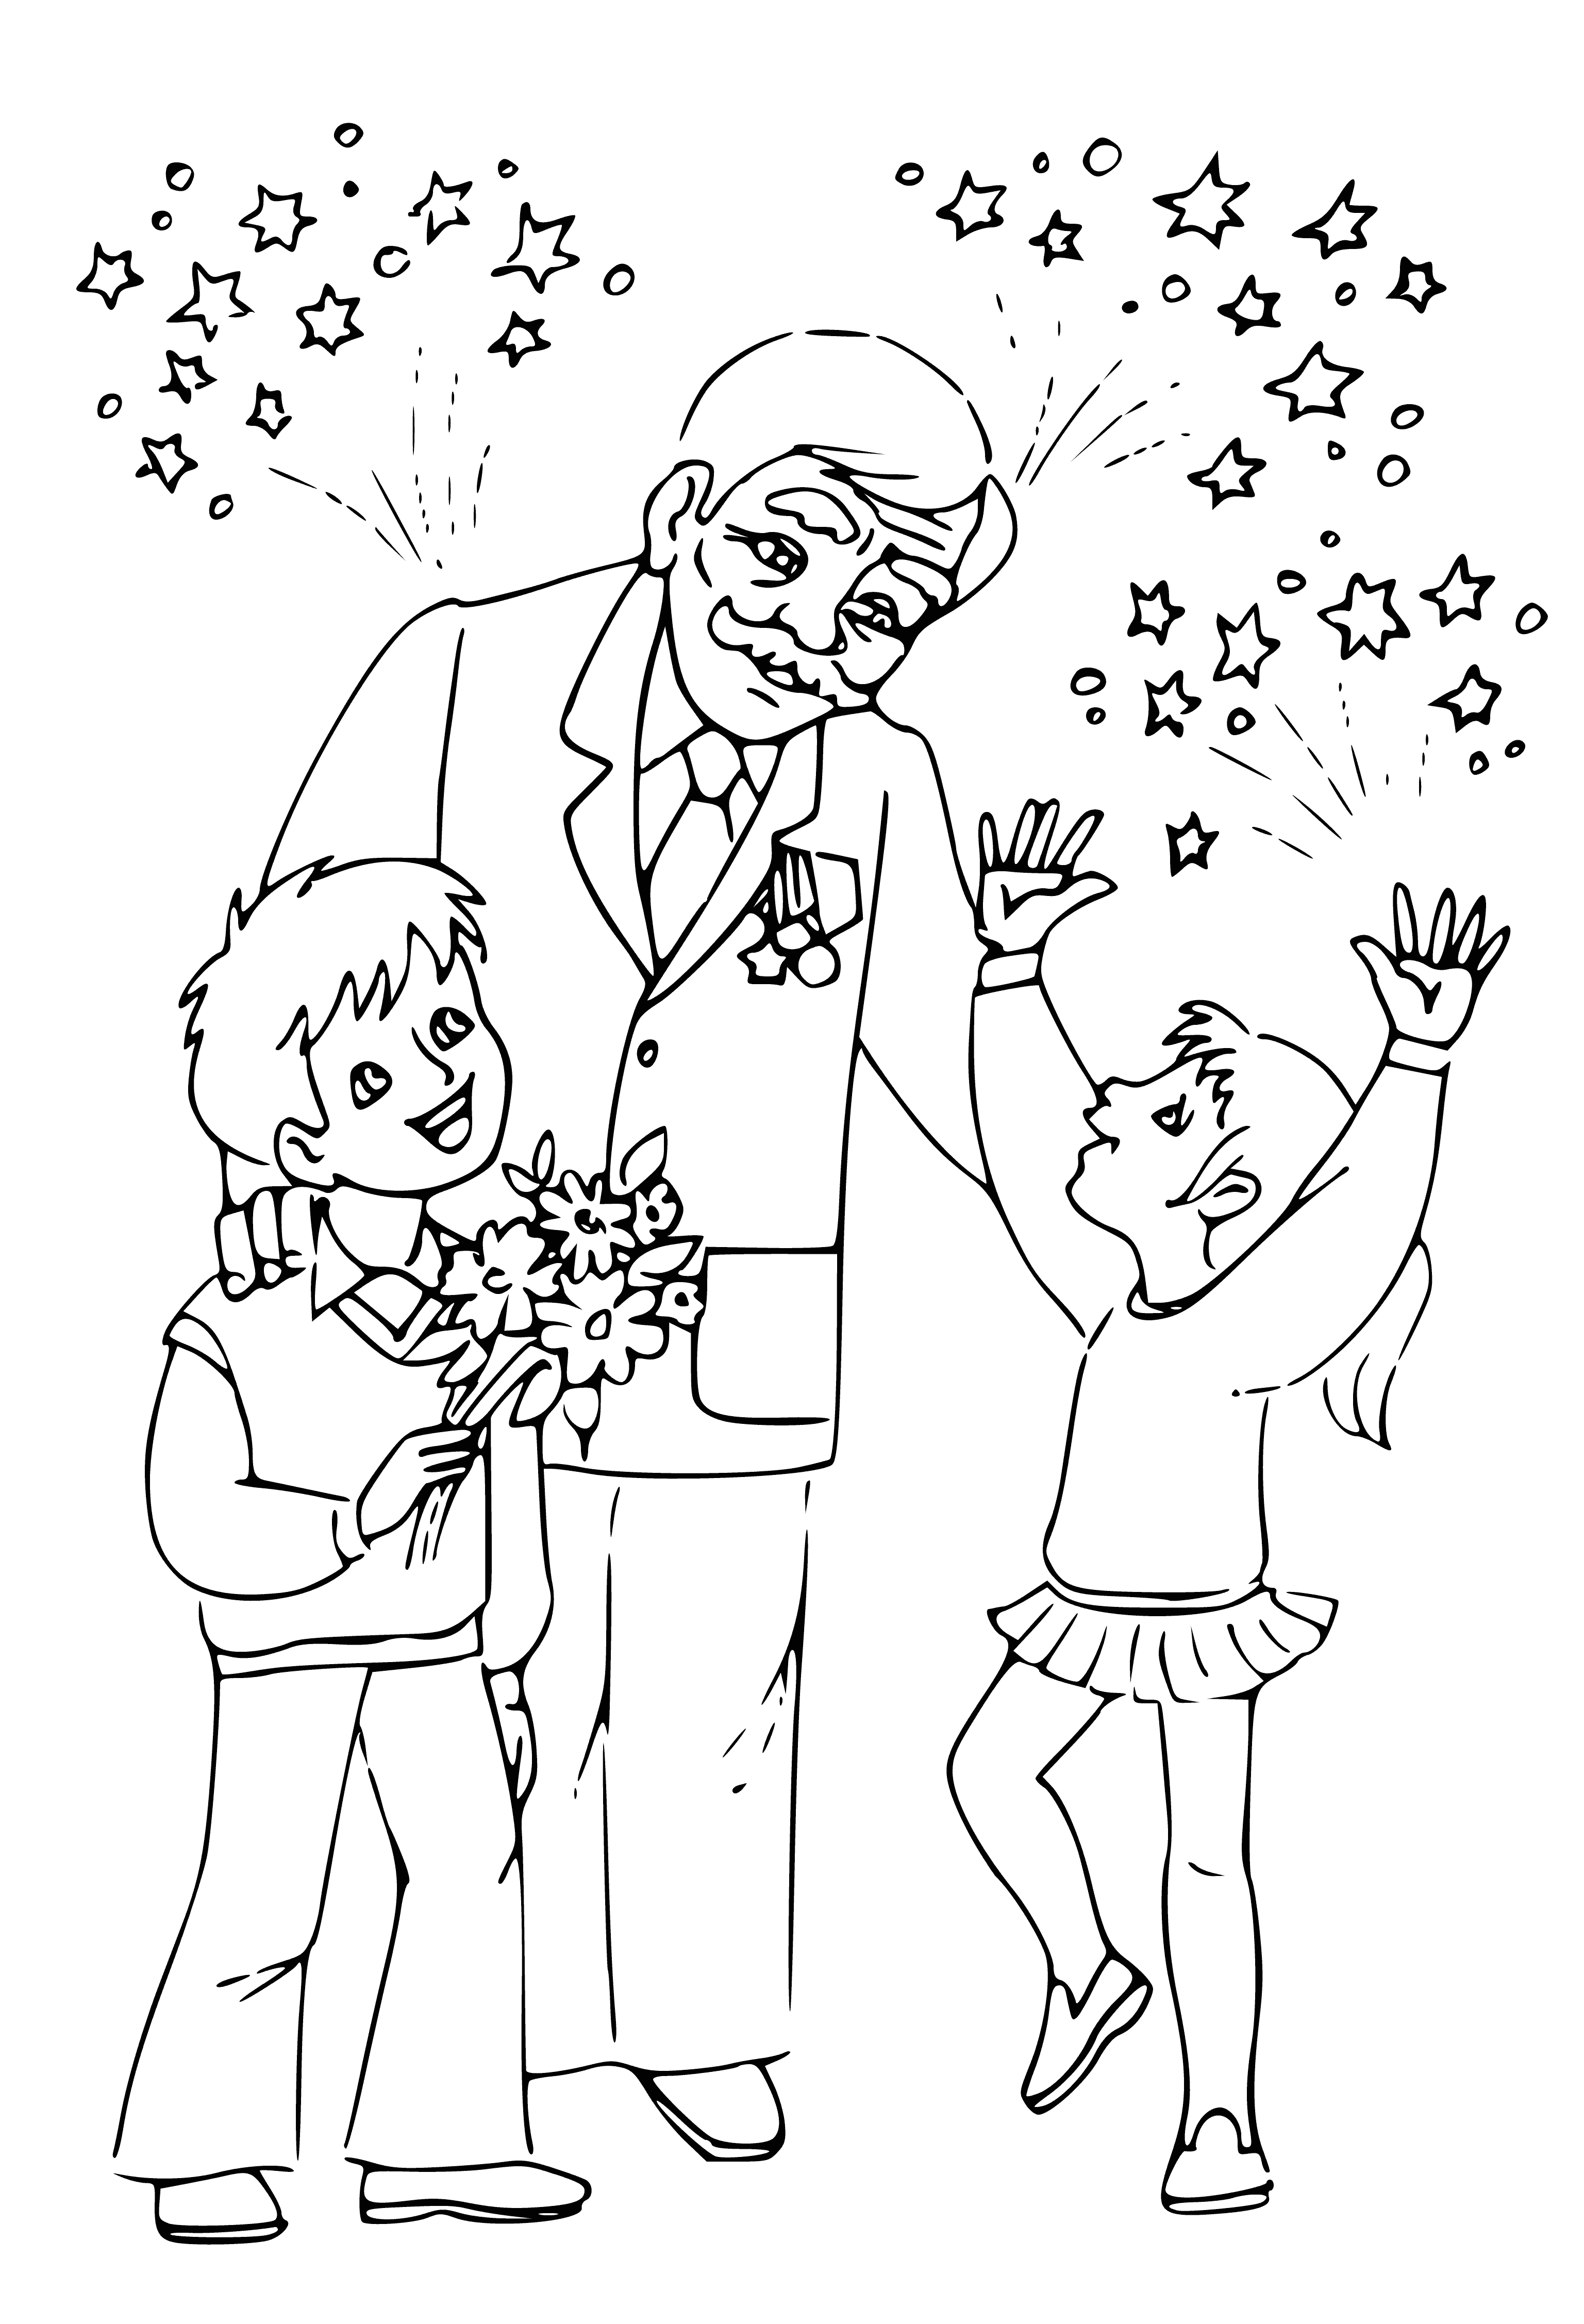 Celebration May 9 coloring page